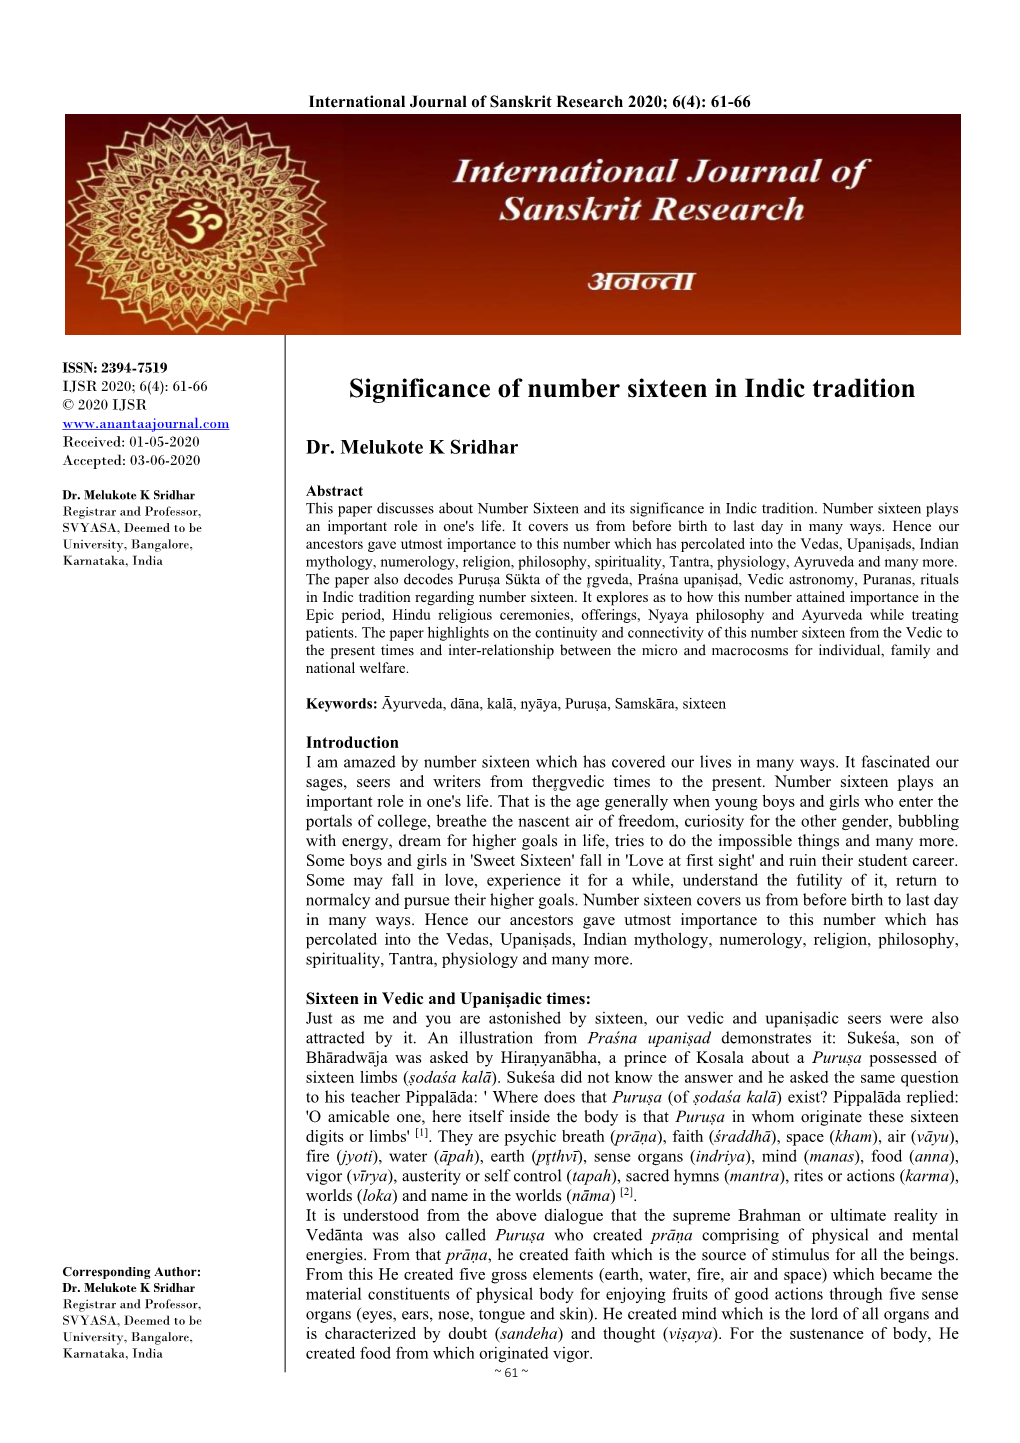 Significance of Number Sixteen in Indic Tradition © 2020 IJSR Received: 01-05-2020 Dr